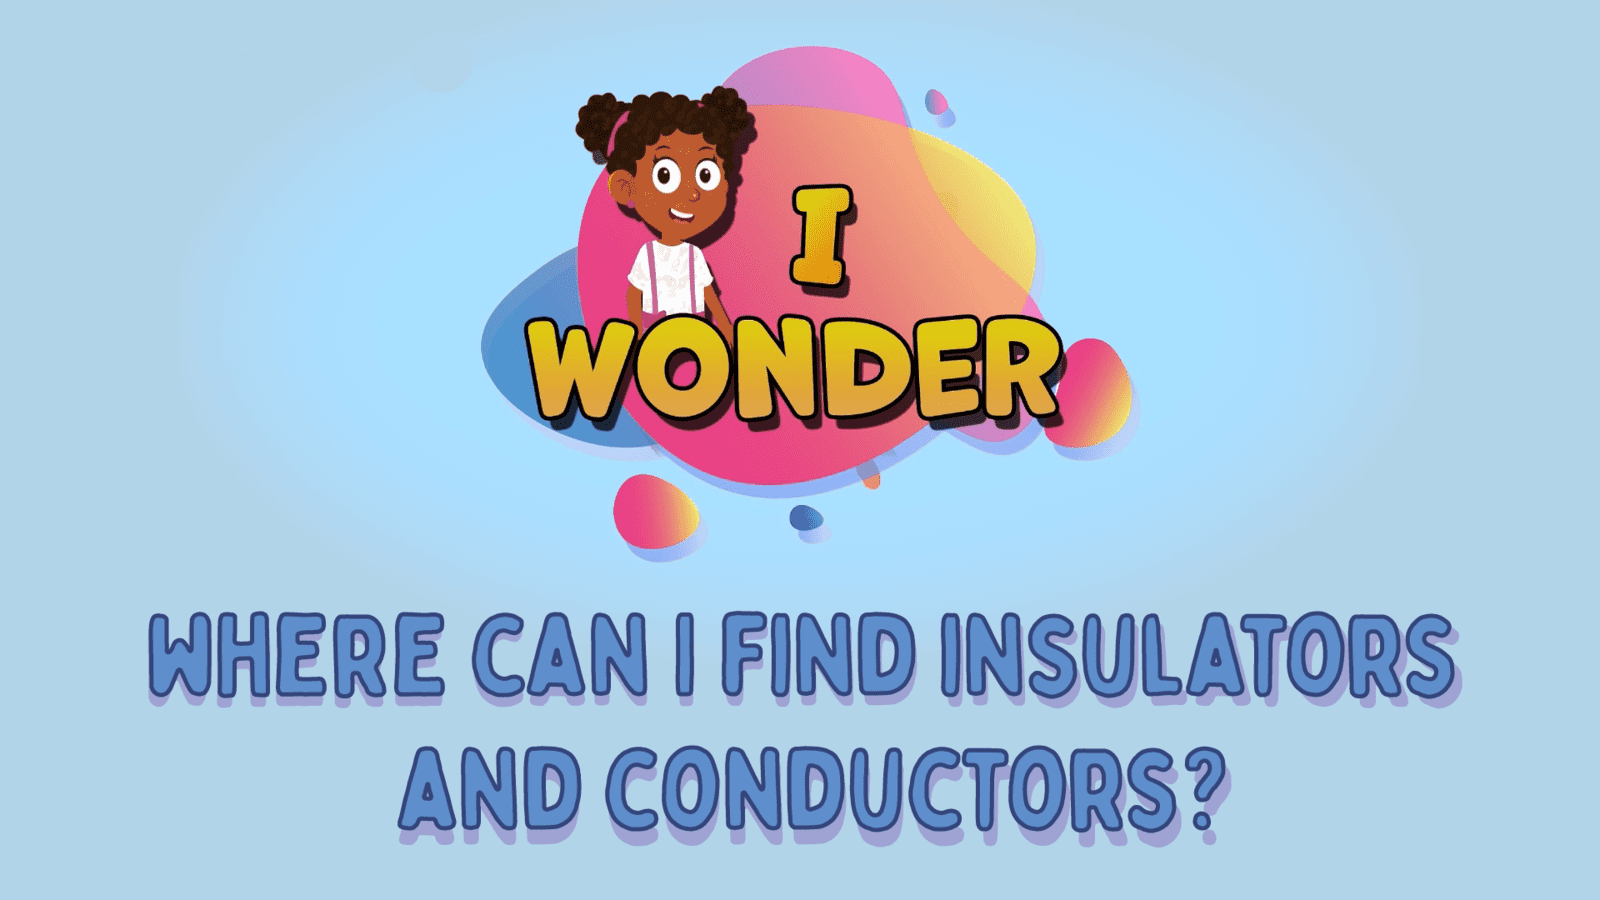 Where Can I Find Insulators And Conductors?